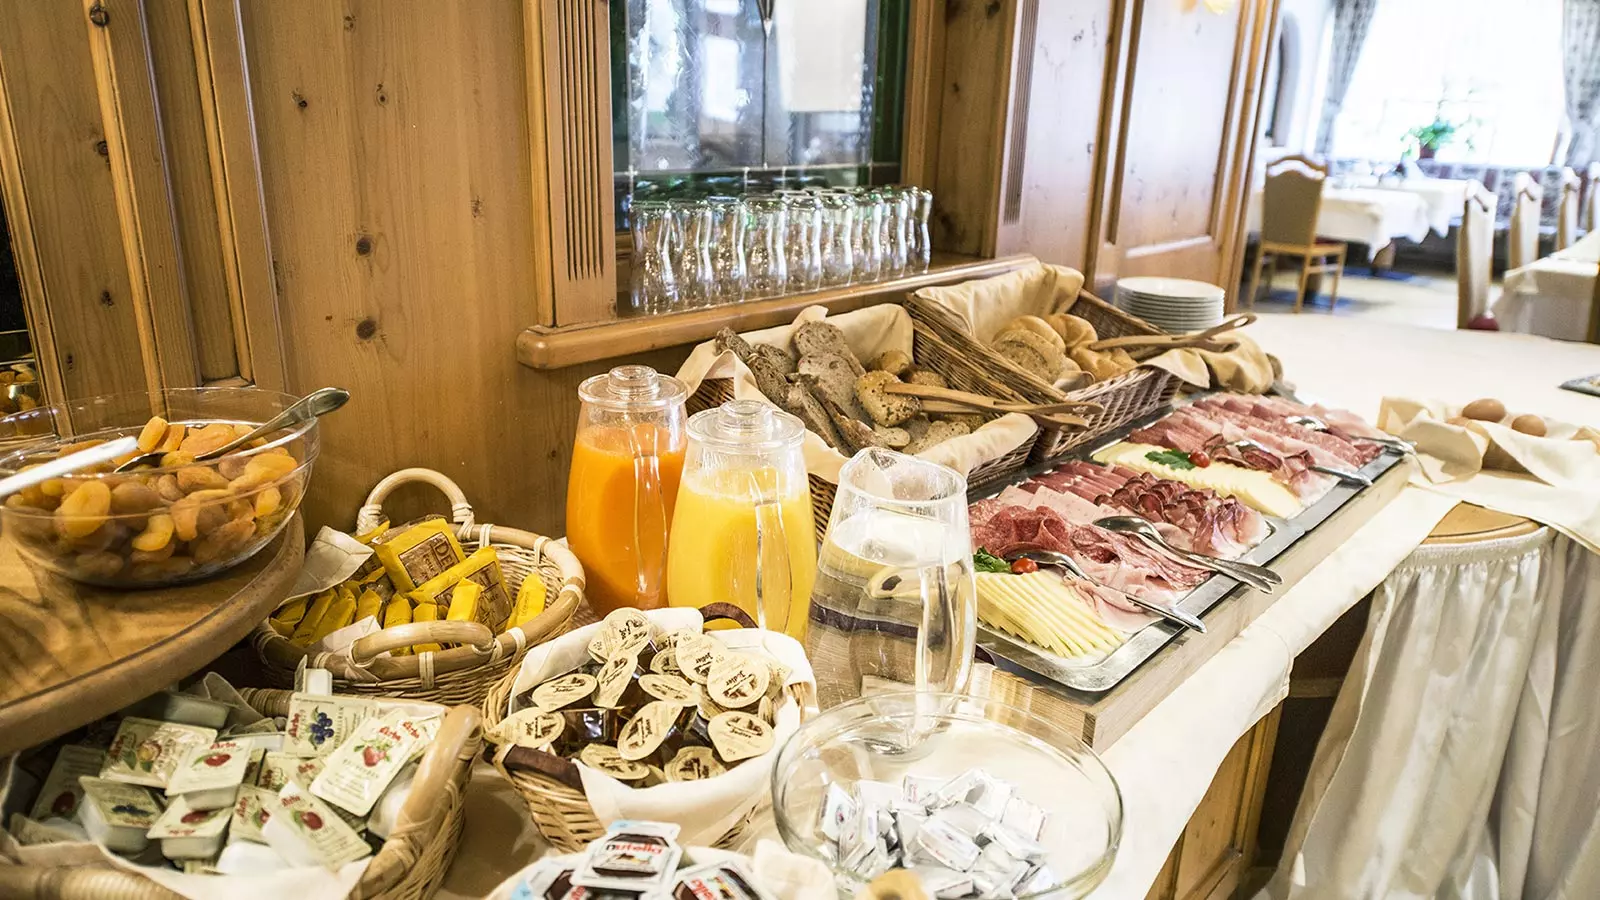 Rich breakfast buffet at our hotel in Val Casies with numerous juices, sweets, cold cuts and jams.